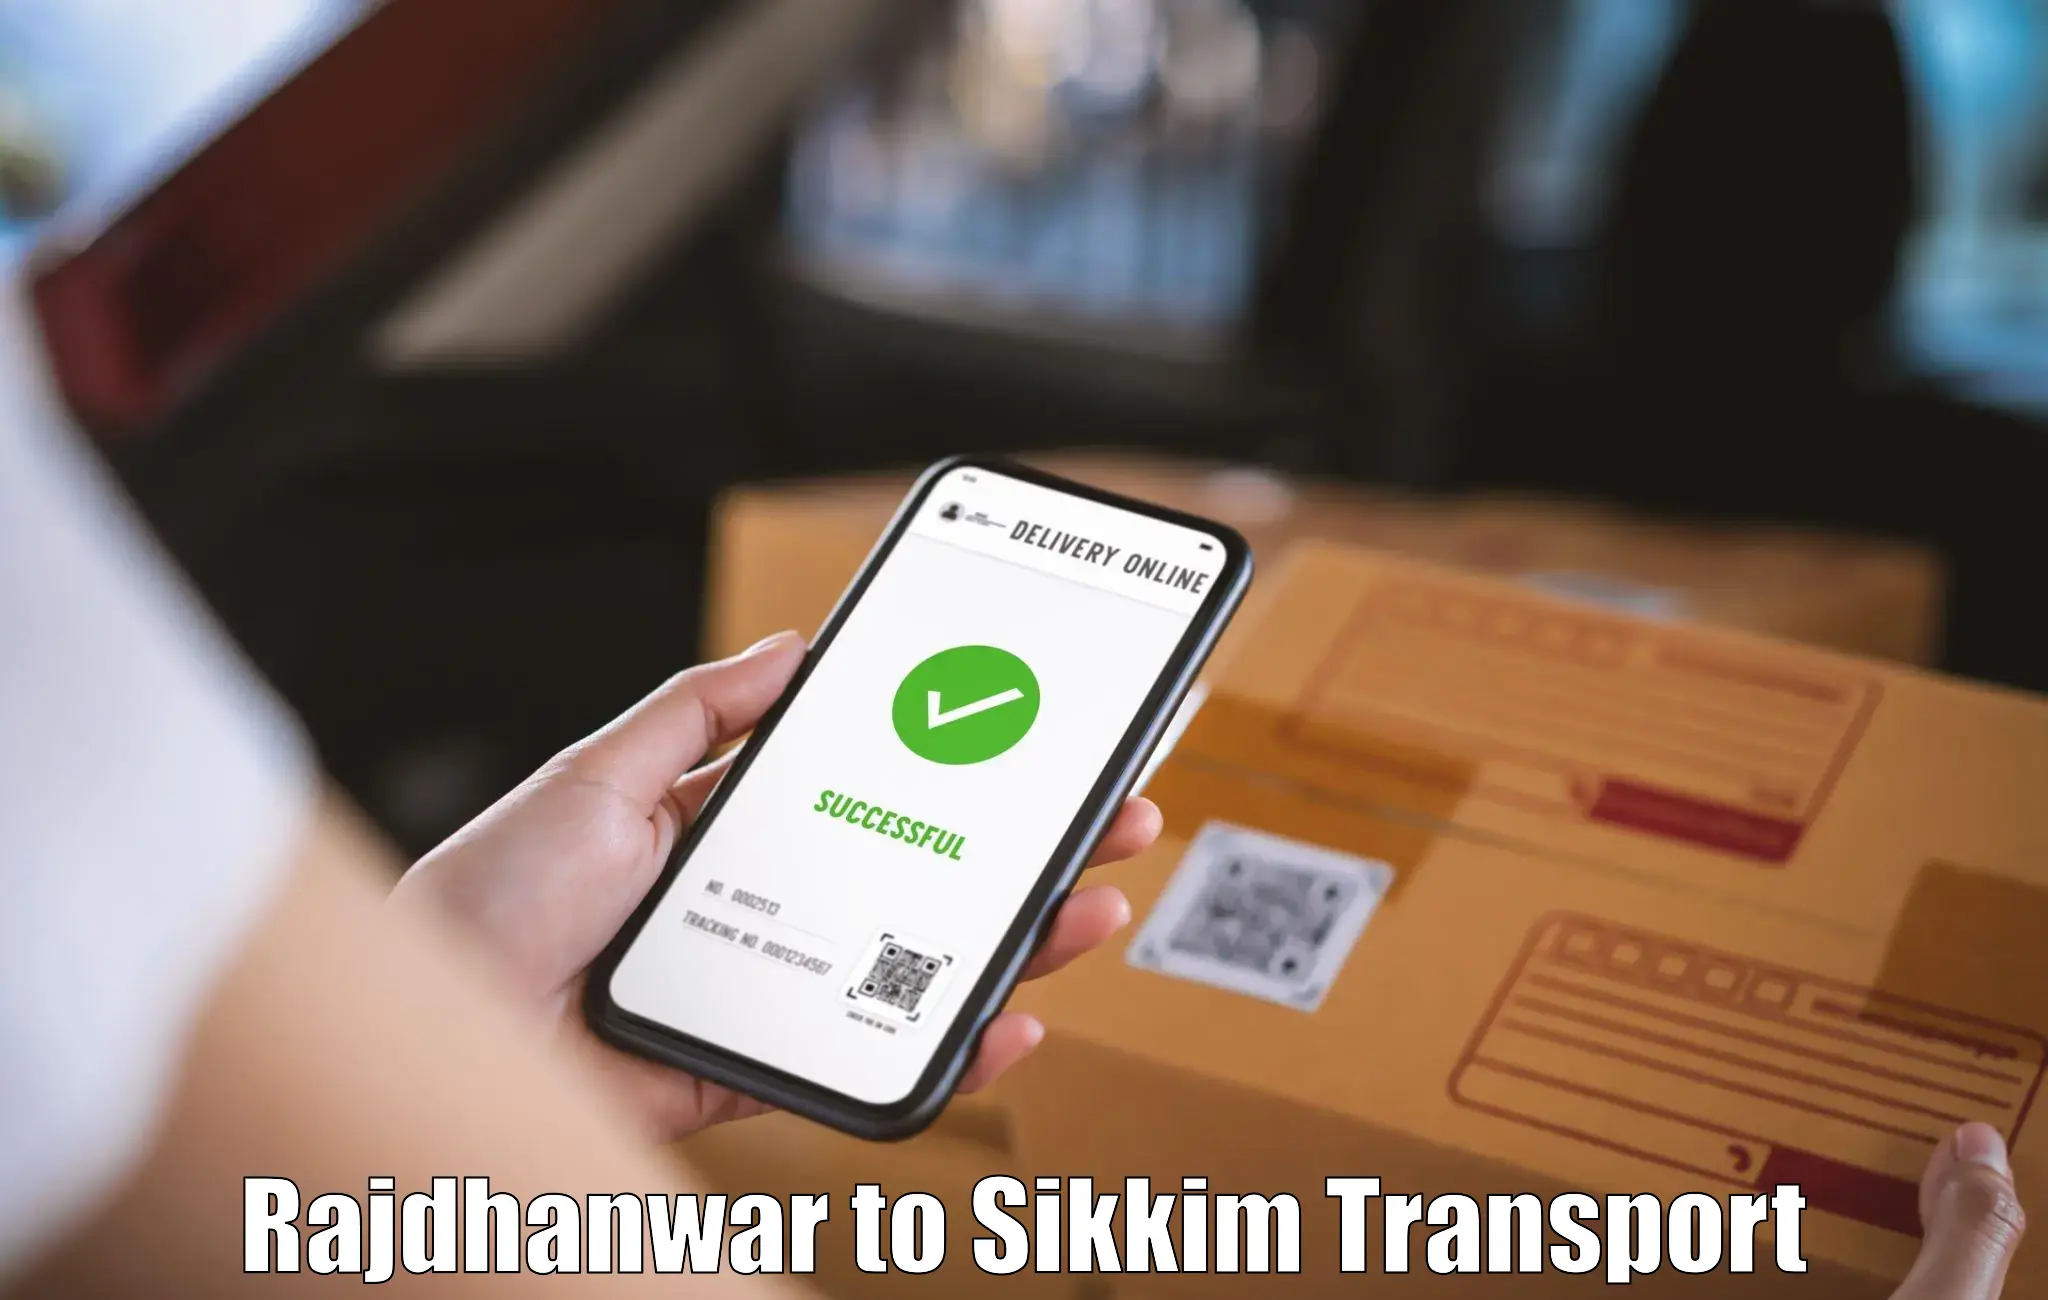 Material transport services Rajdhanwar to South Sikkim